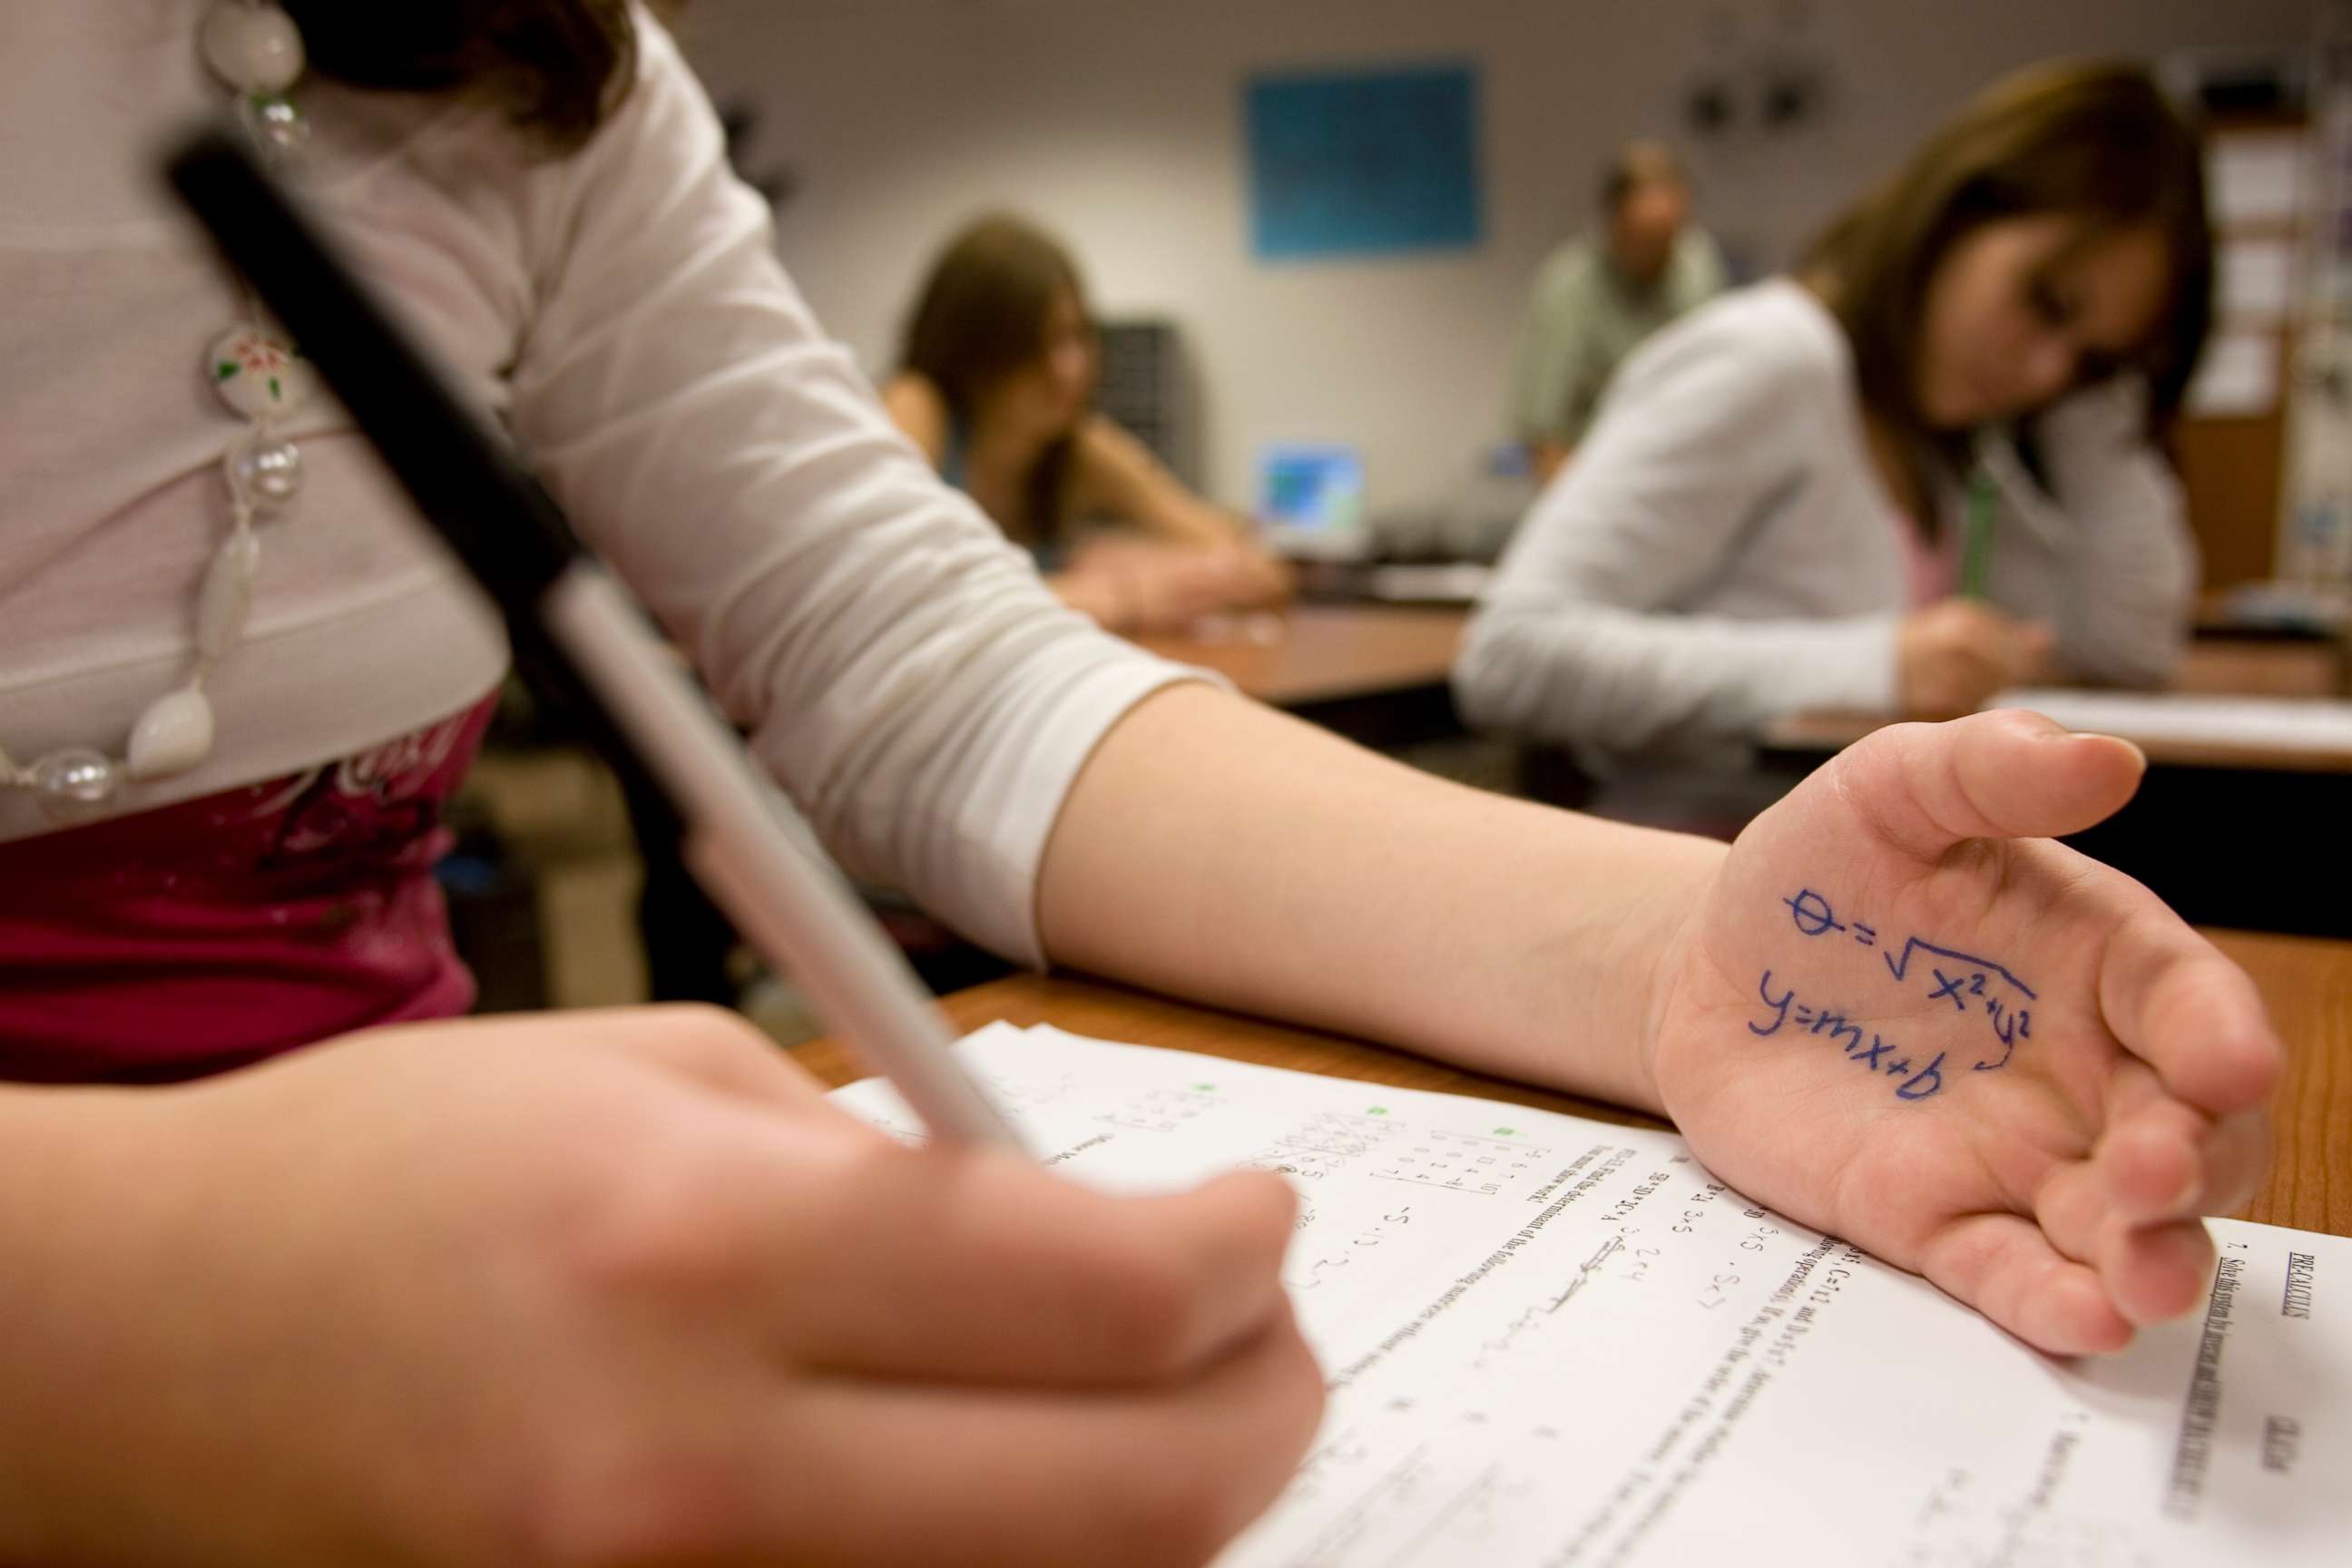 PHOTO: A student cheats on a test in this stock photo.